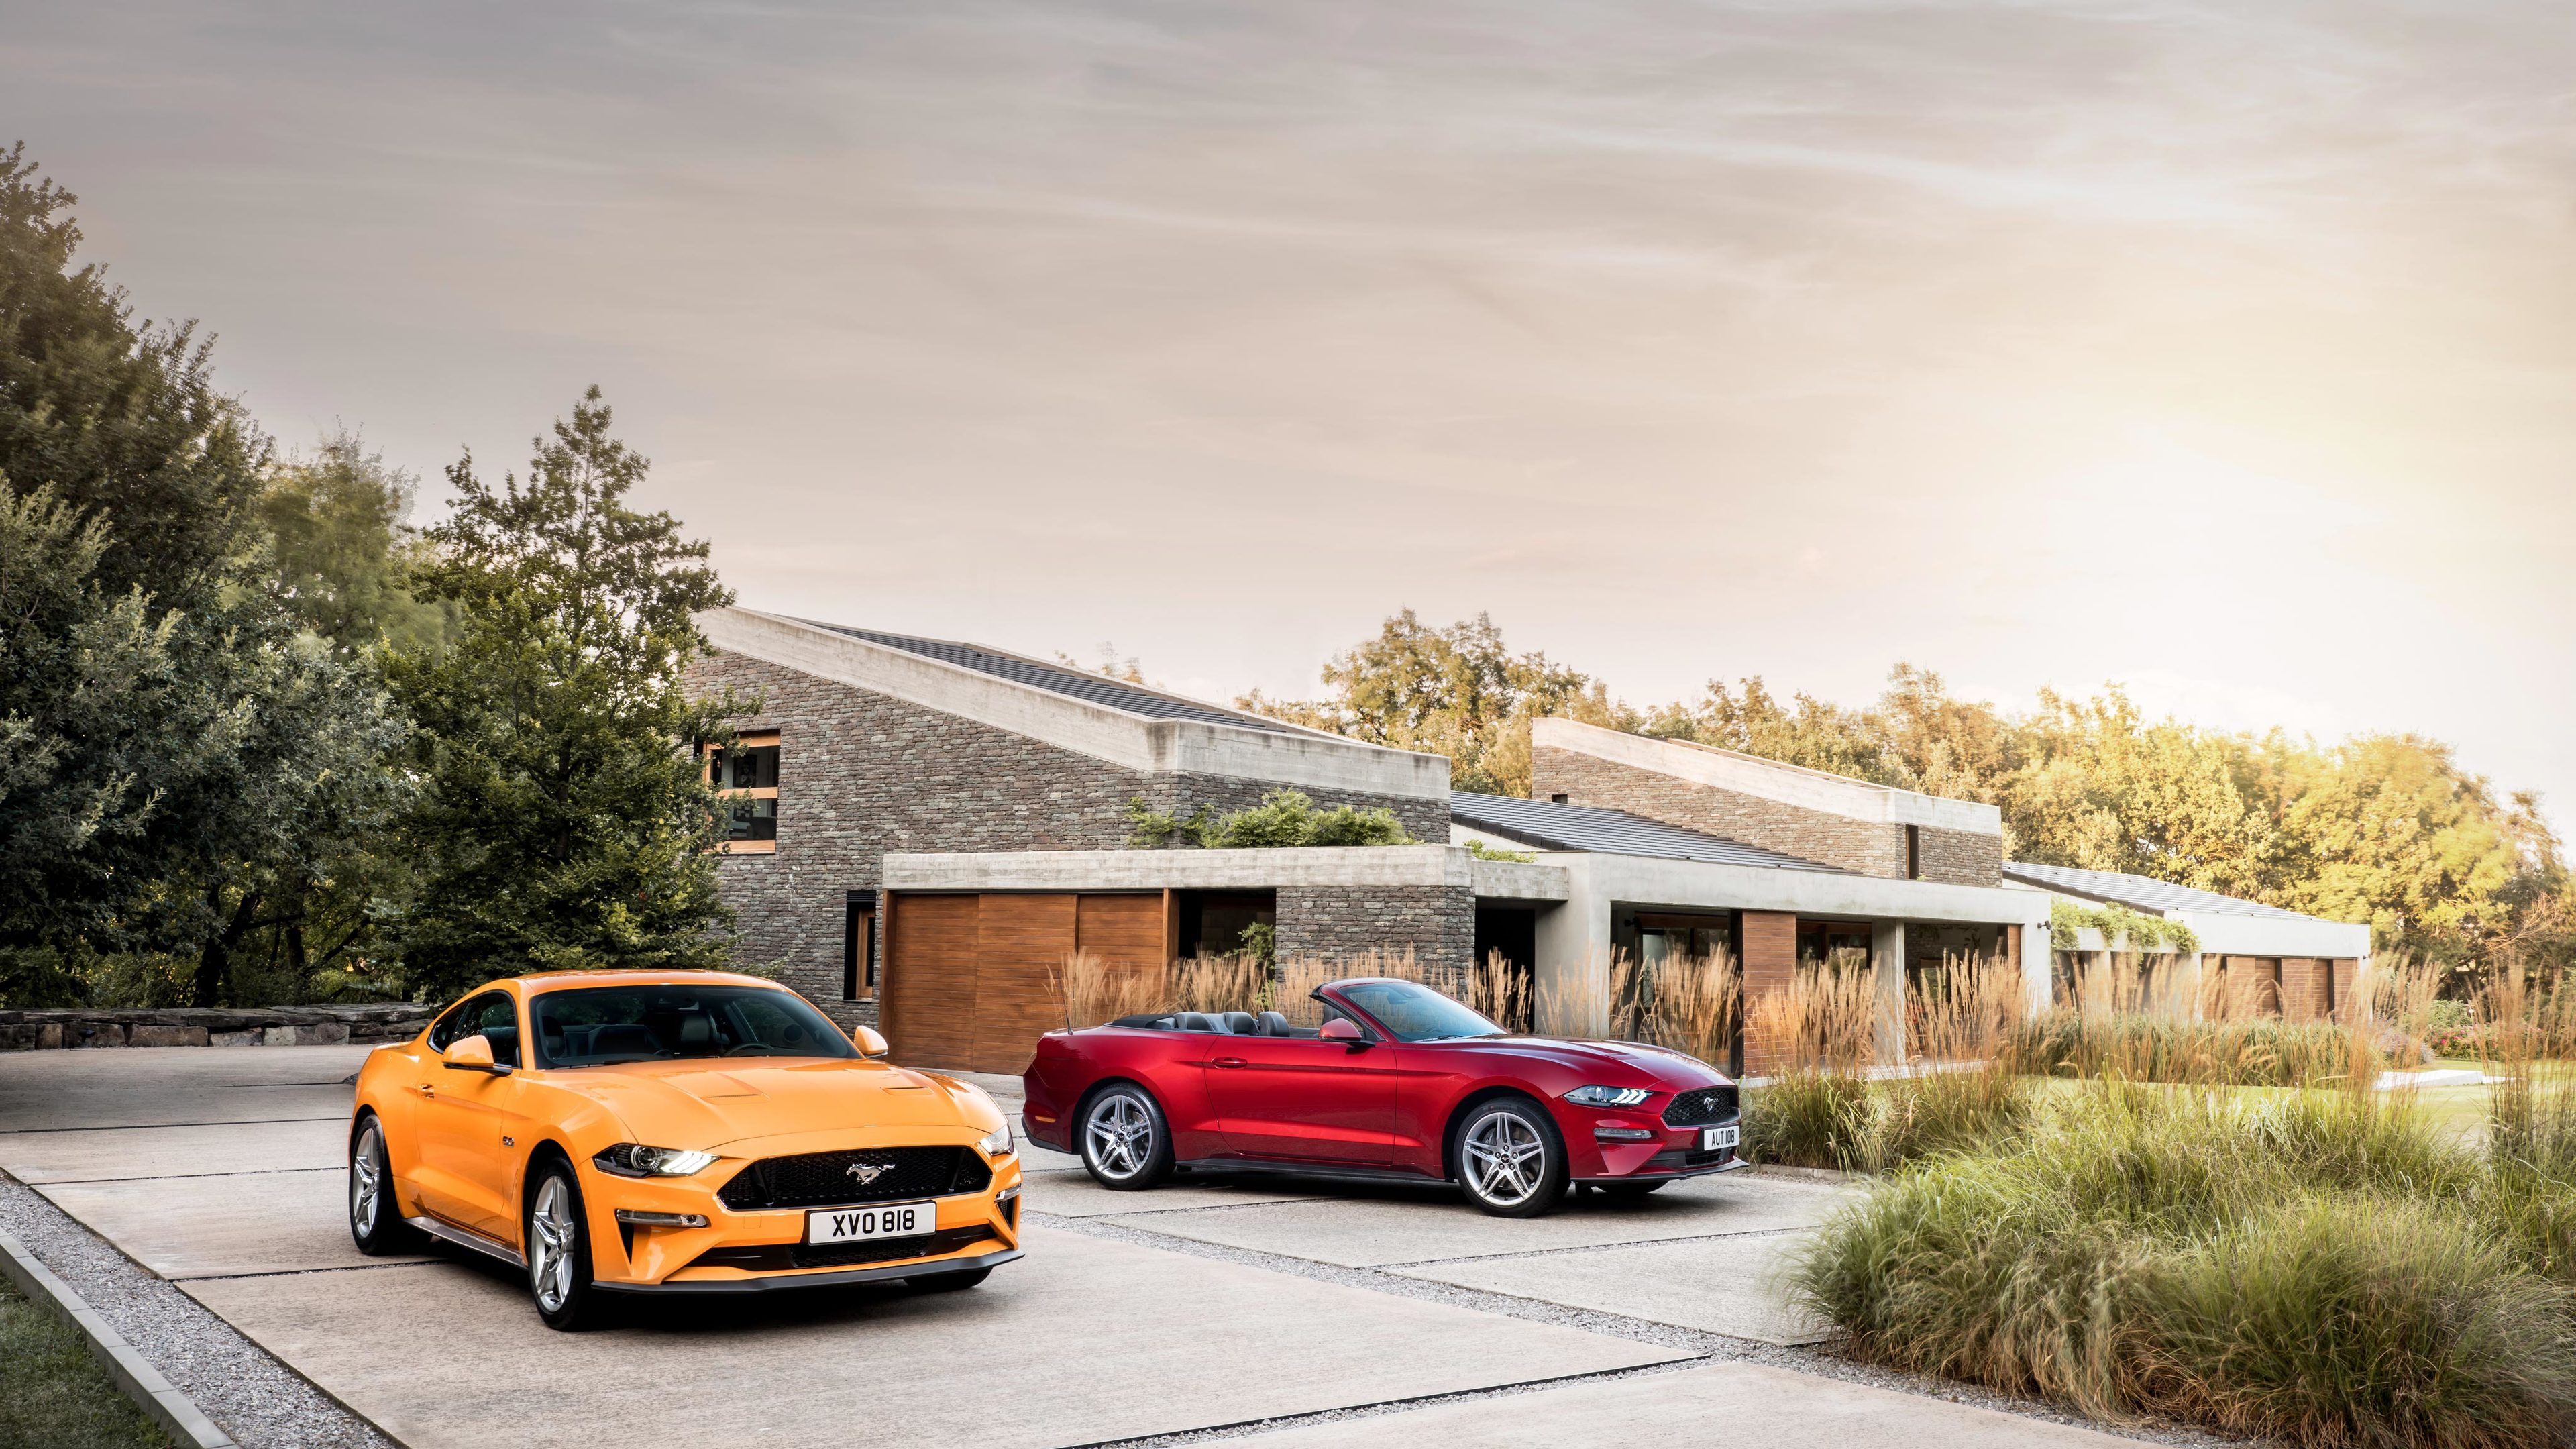 Ford Mustang Gt Fastback And Ecoboost Convertible - Mustang Convertible - HD Wallpaper 